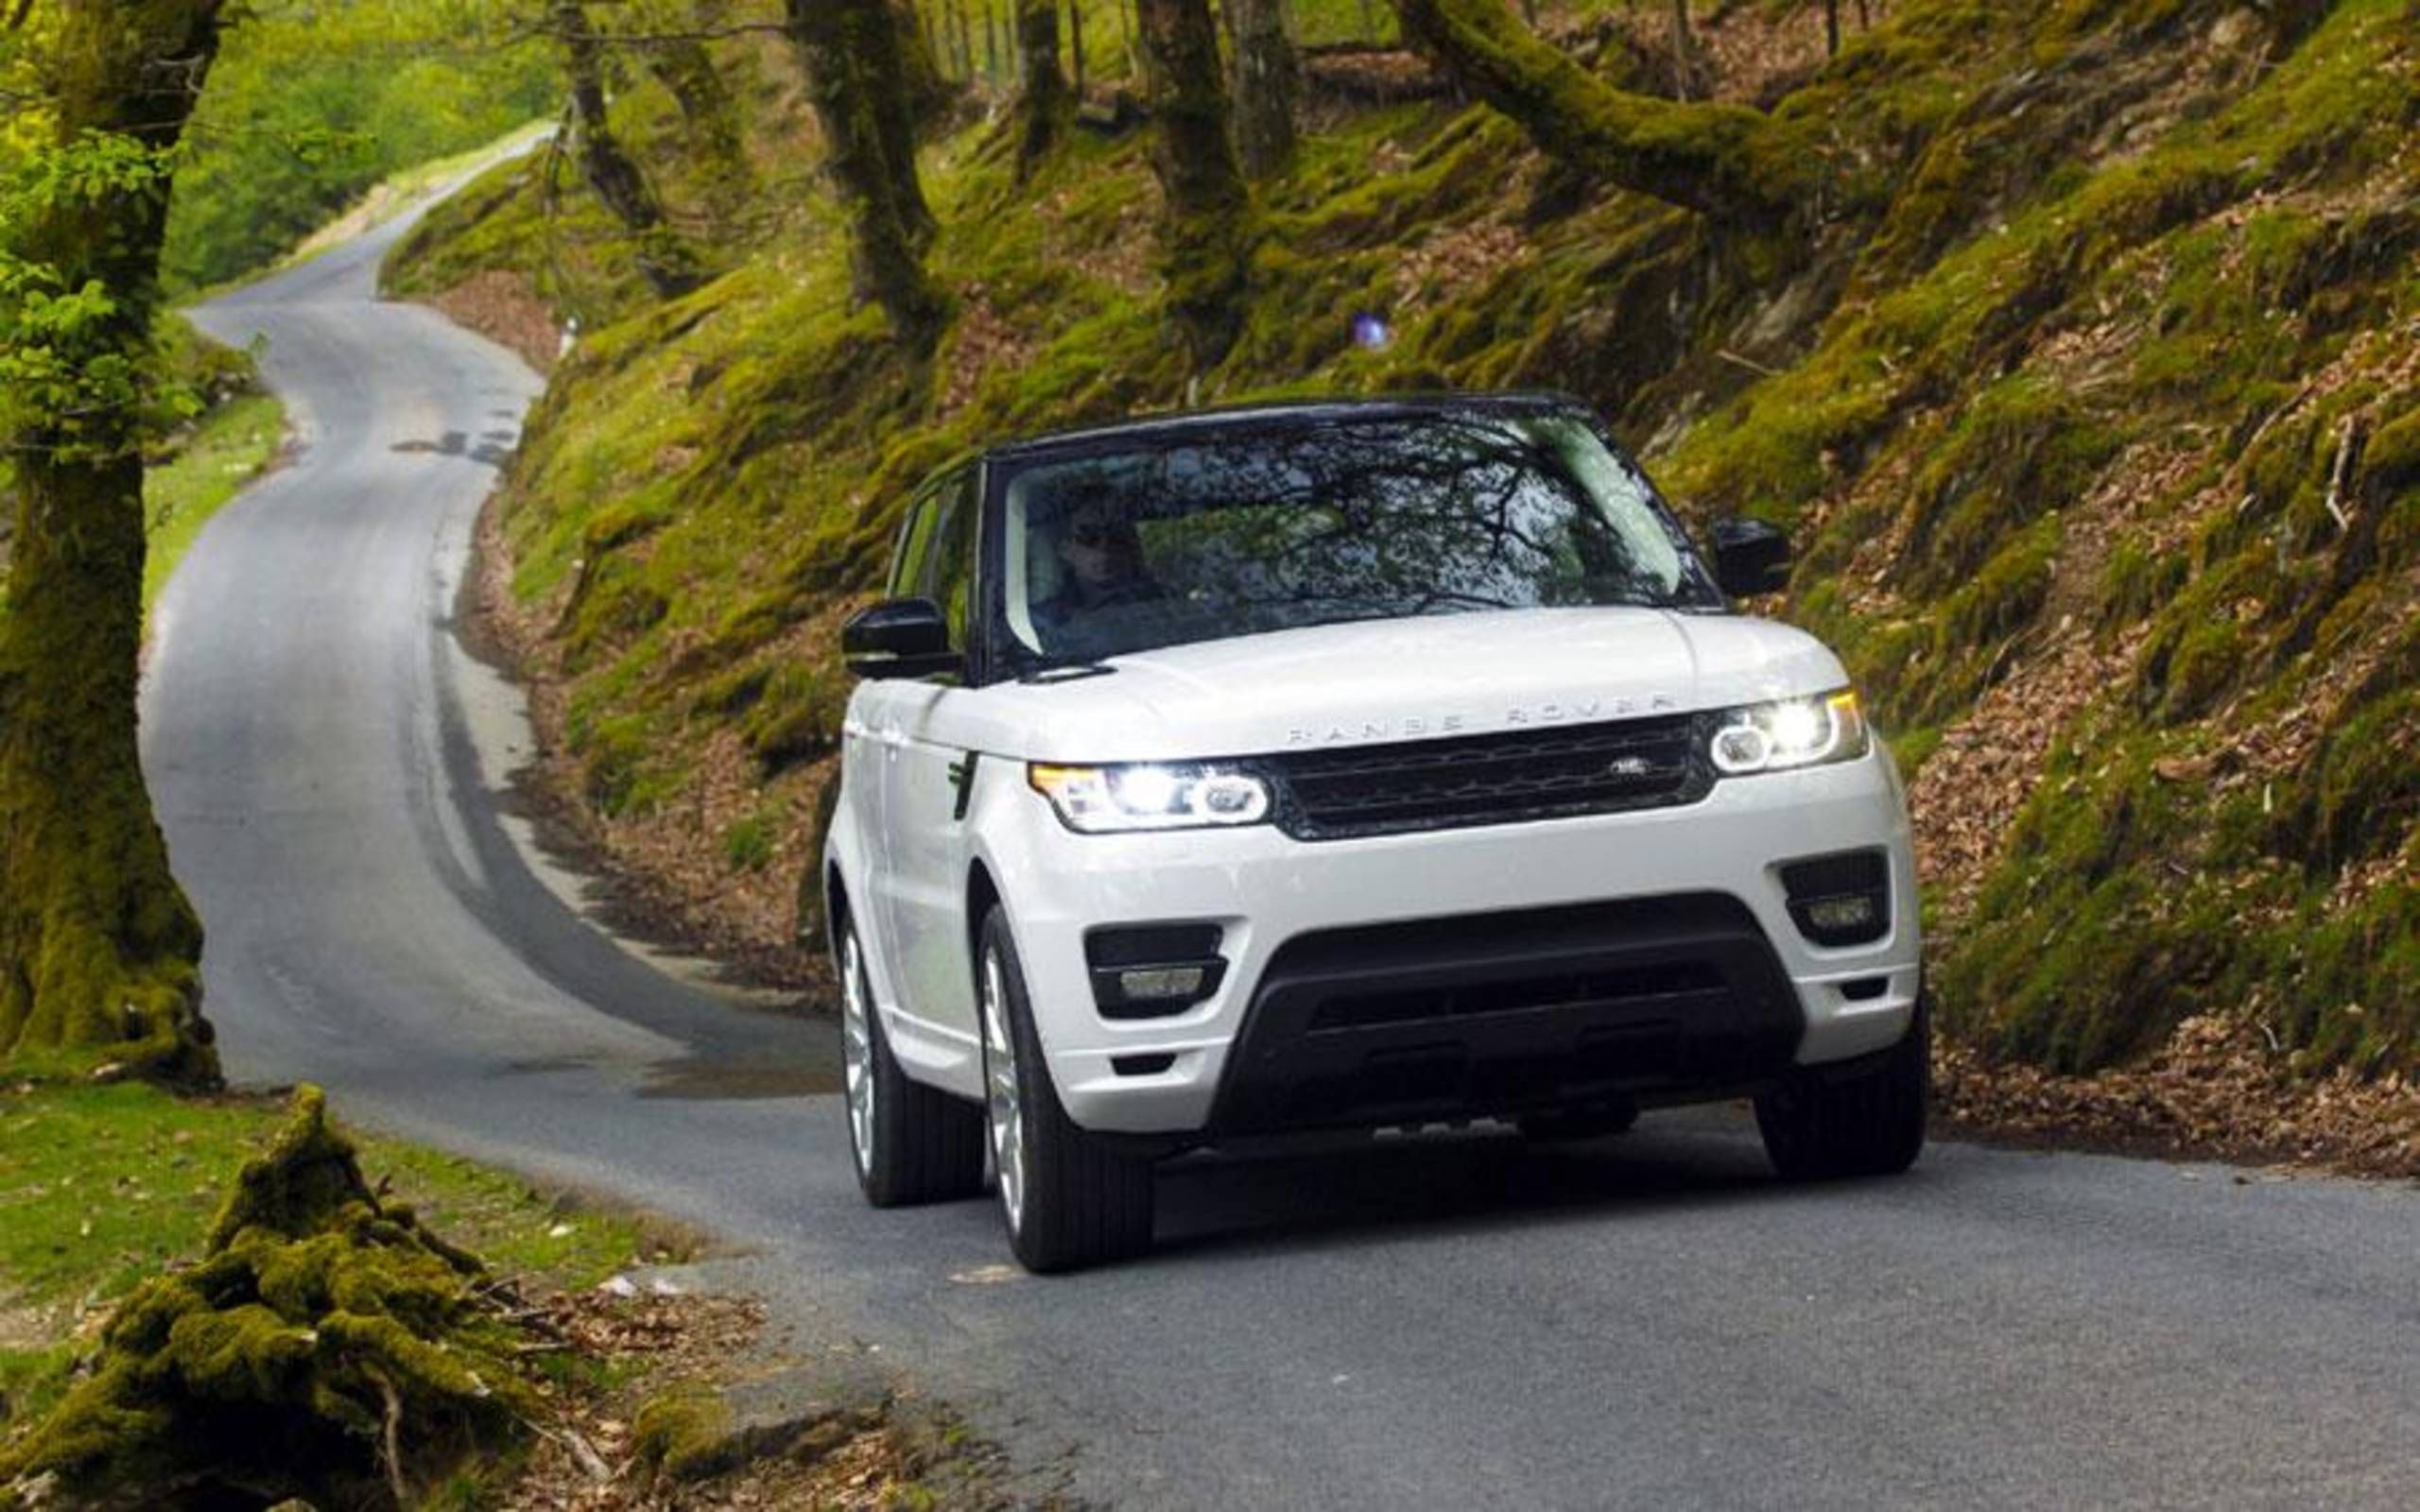 Range Rover Sport Review  . This Might Be All Well And Good, But Does The Range Rover Sport Stack Up Well With Its Rivals?